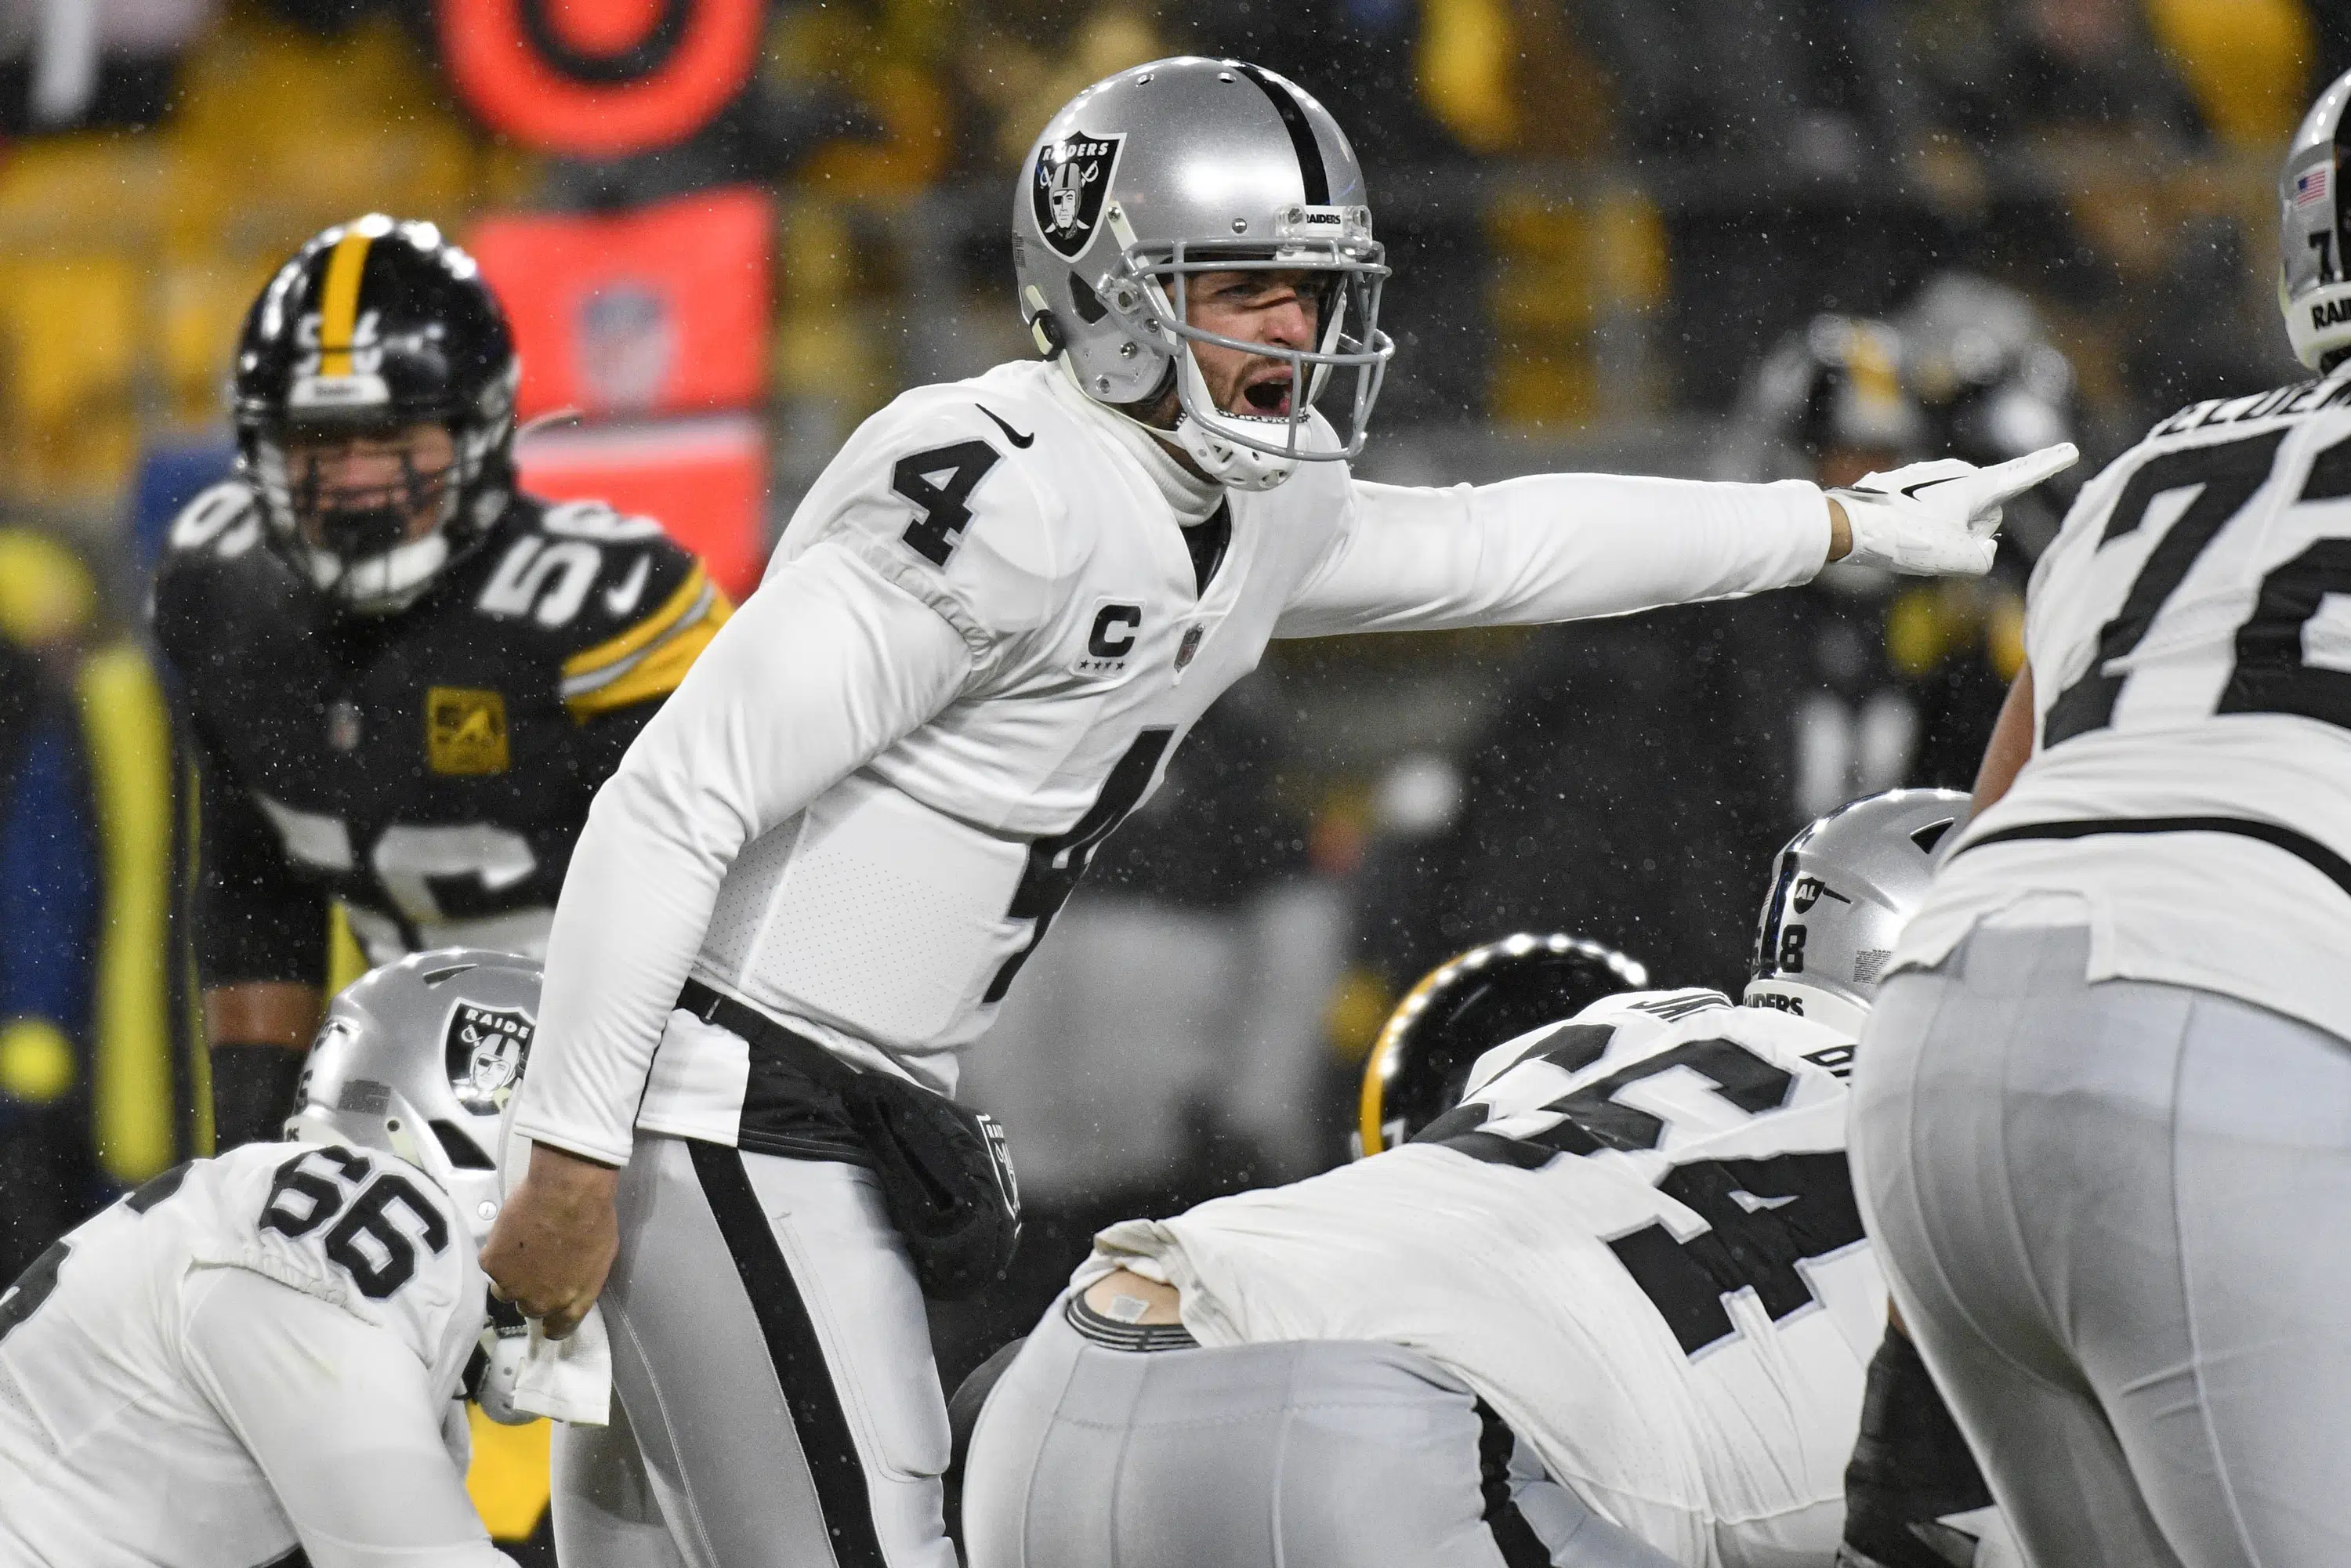 QB Derek Carr says he’s embracing the new city’s challenge, the team